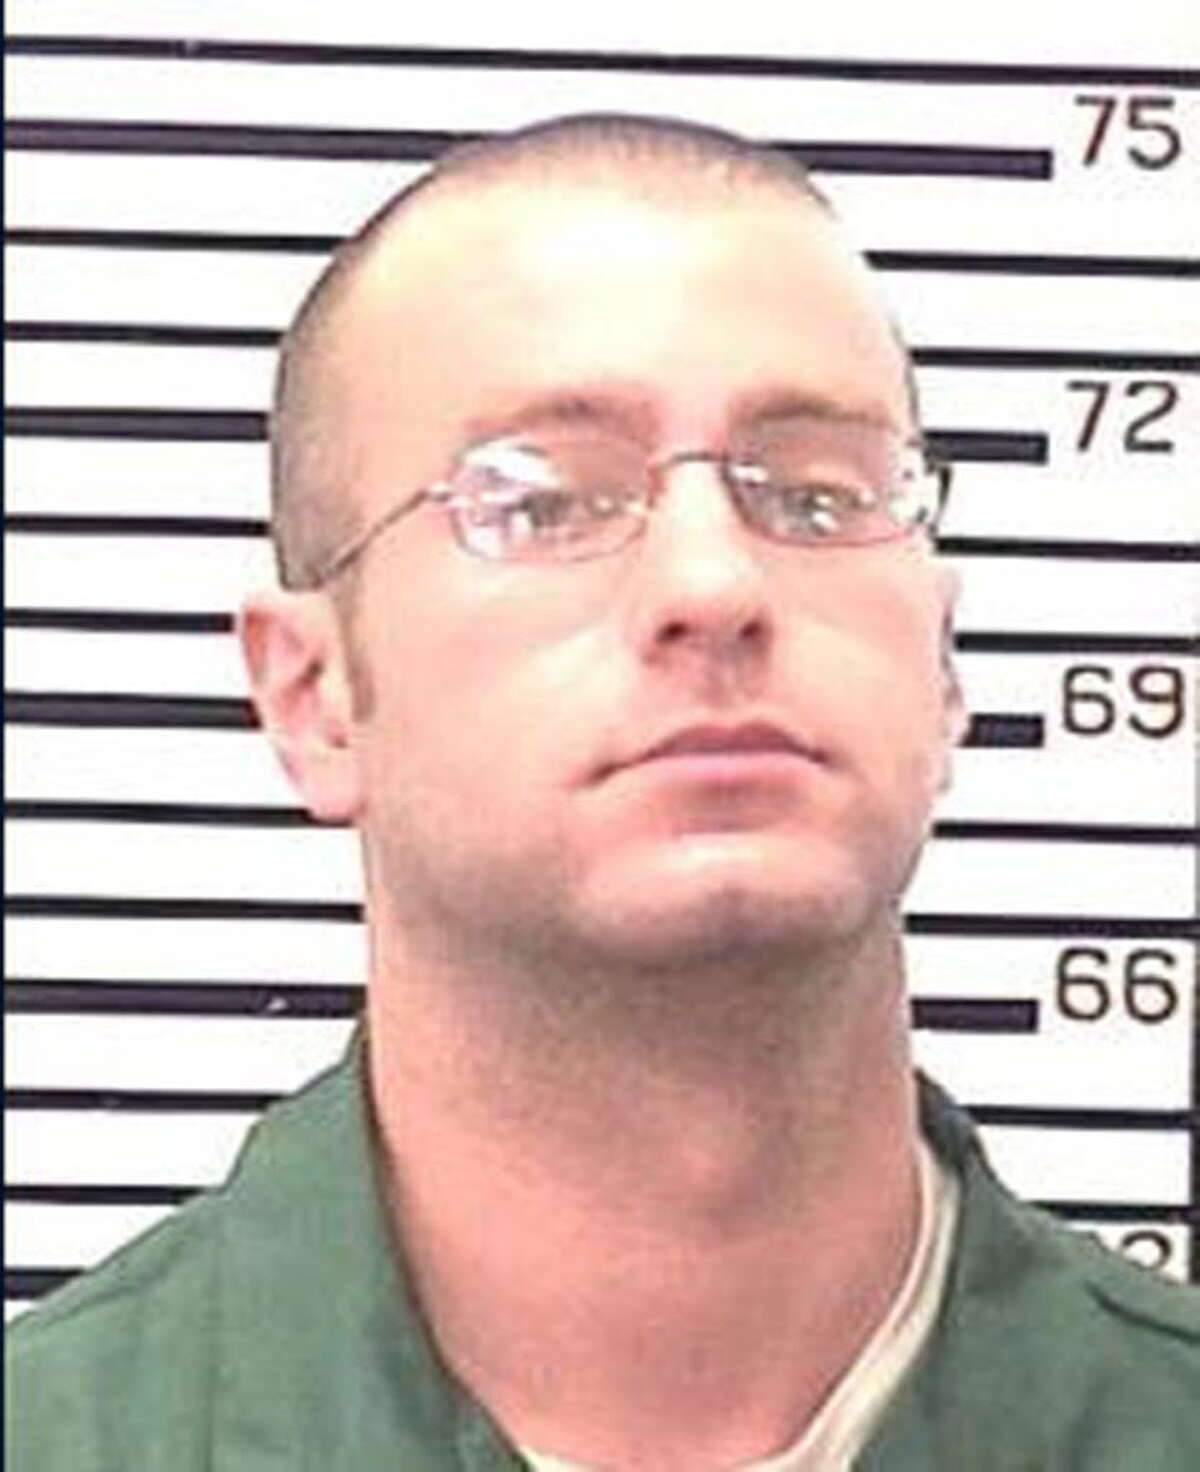 Christopher Porco, 28, pictured here in a prison mugshot taken at state prison in November 2009.